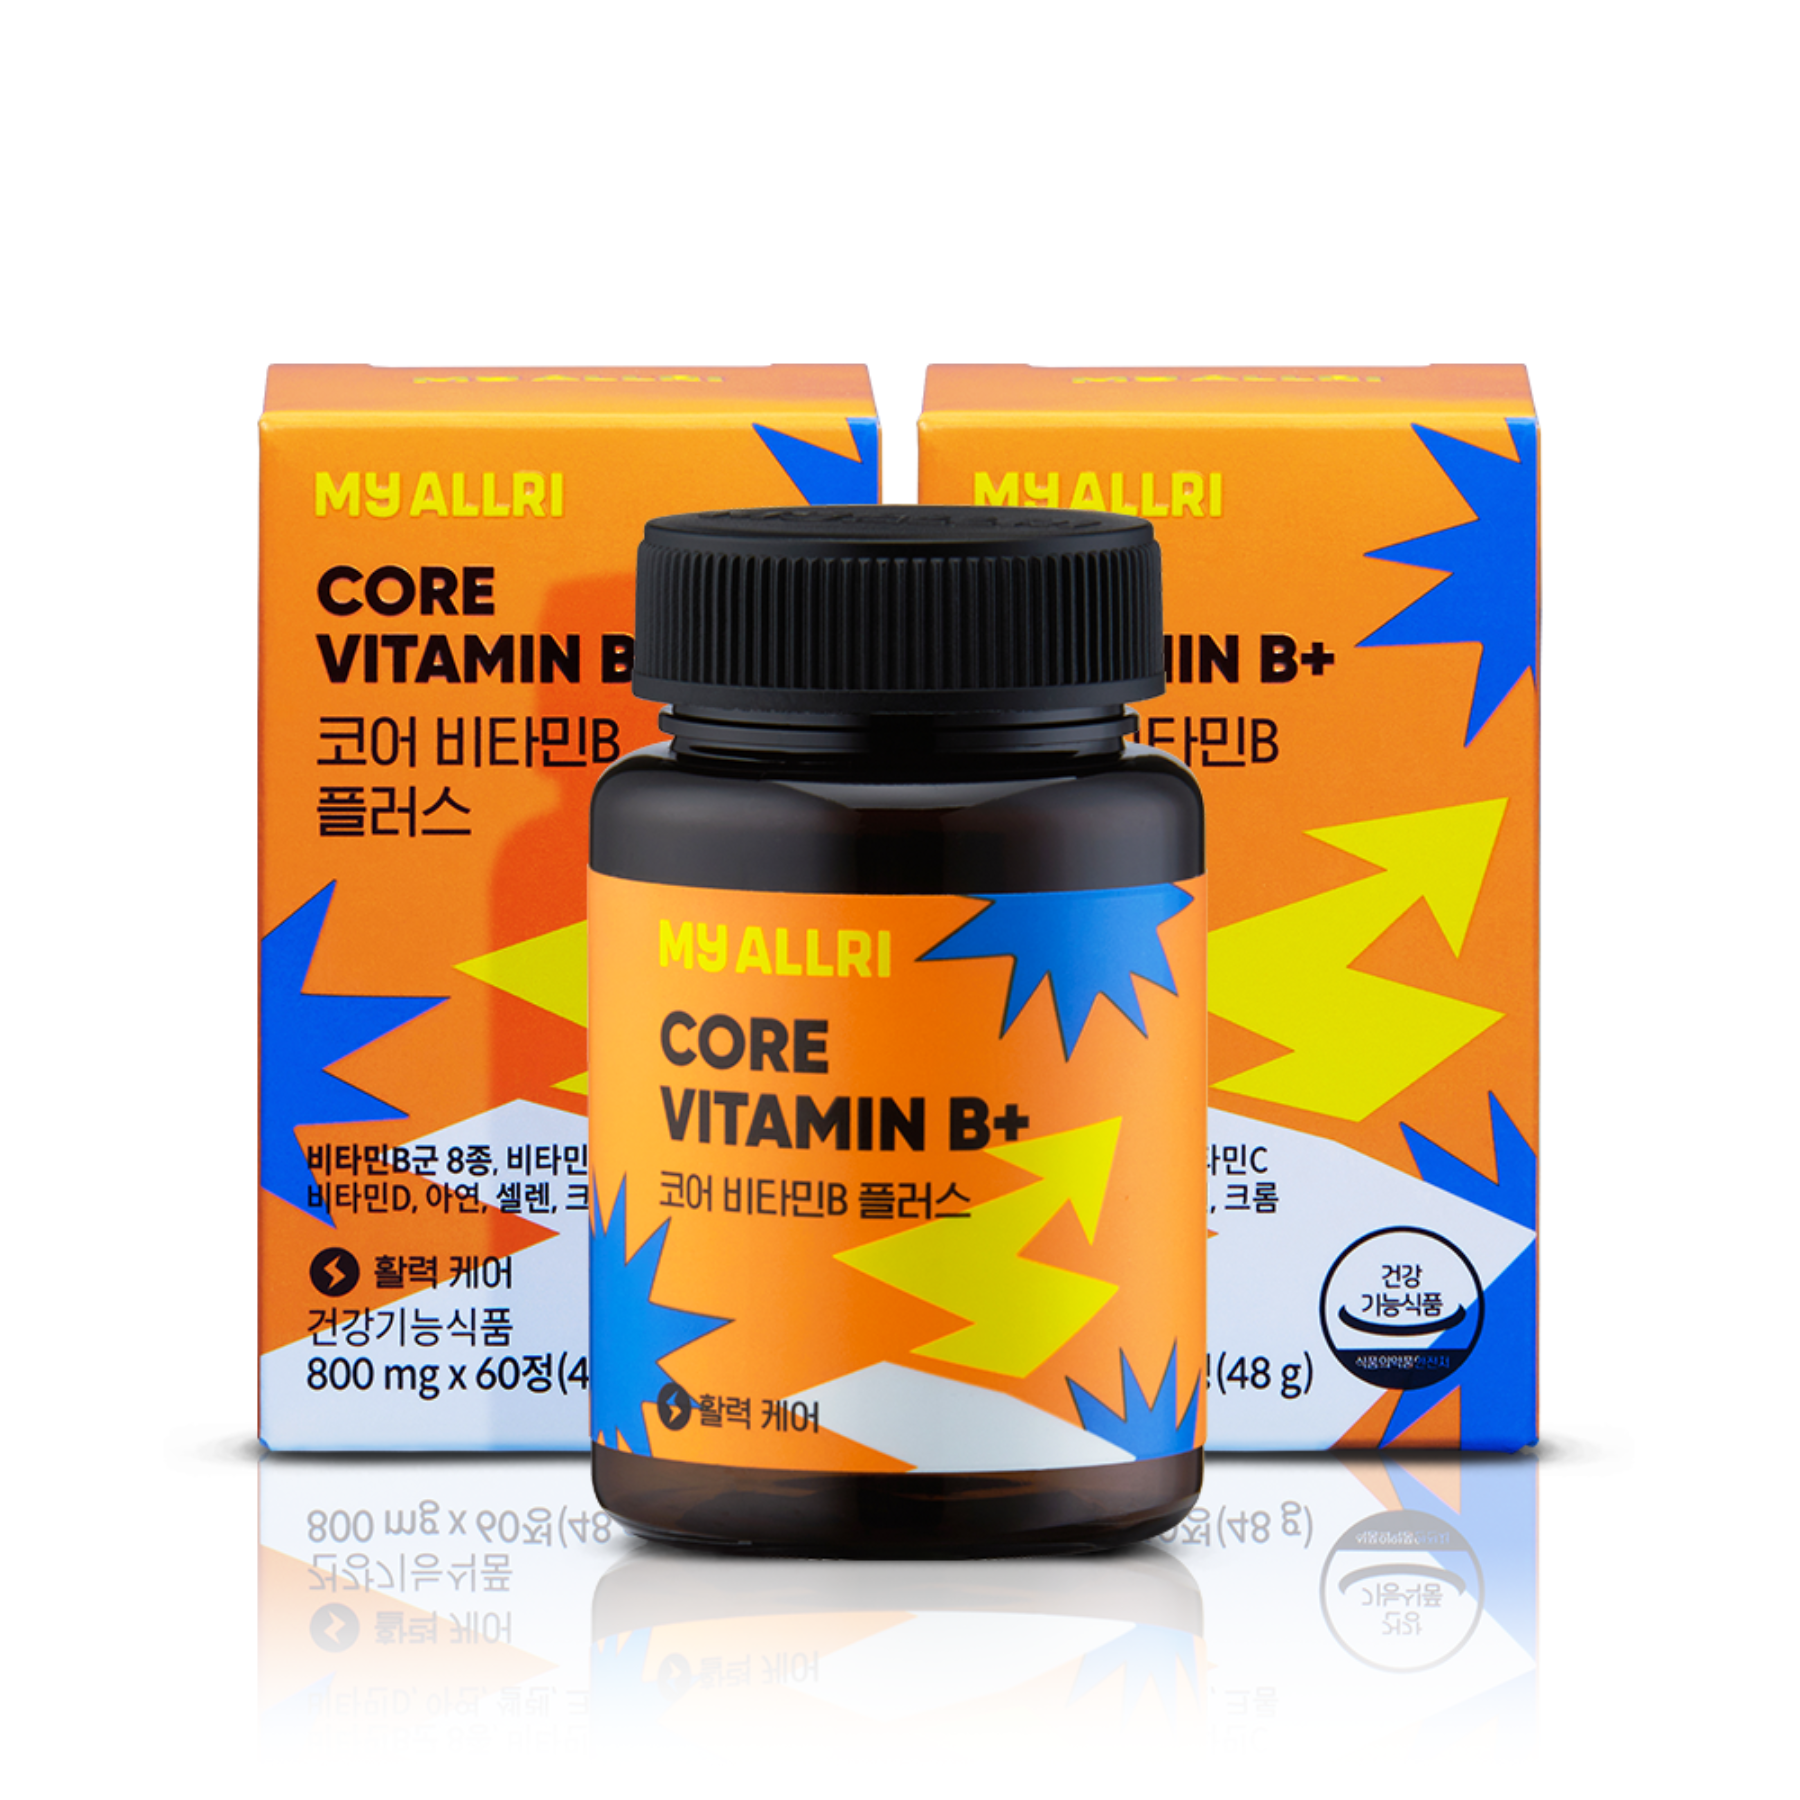 ★50%★ Core Vitamin B Plus 2+2 for 8 months